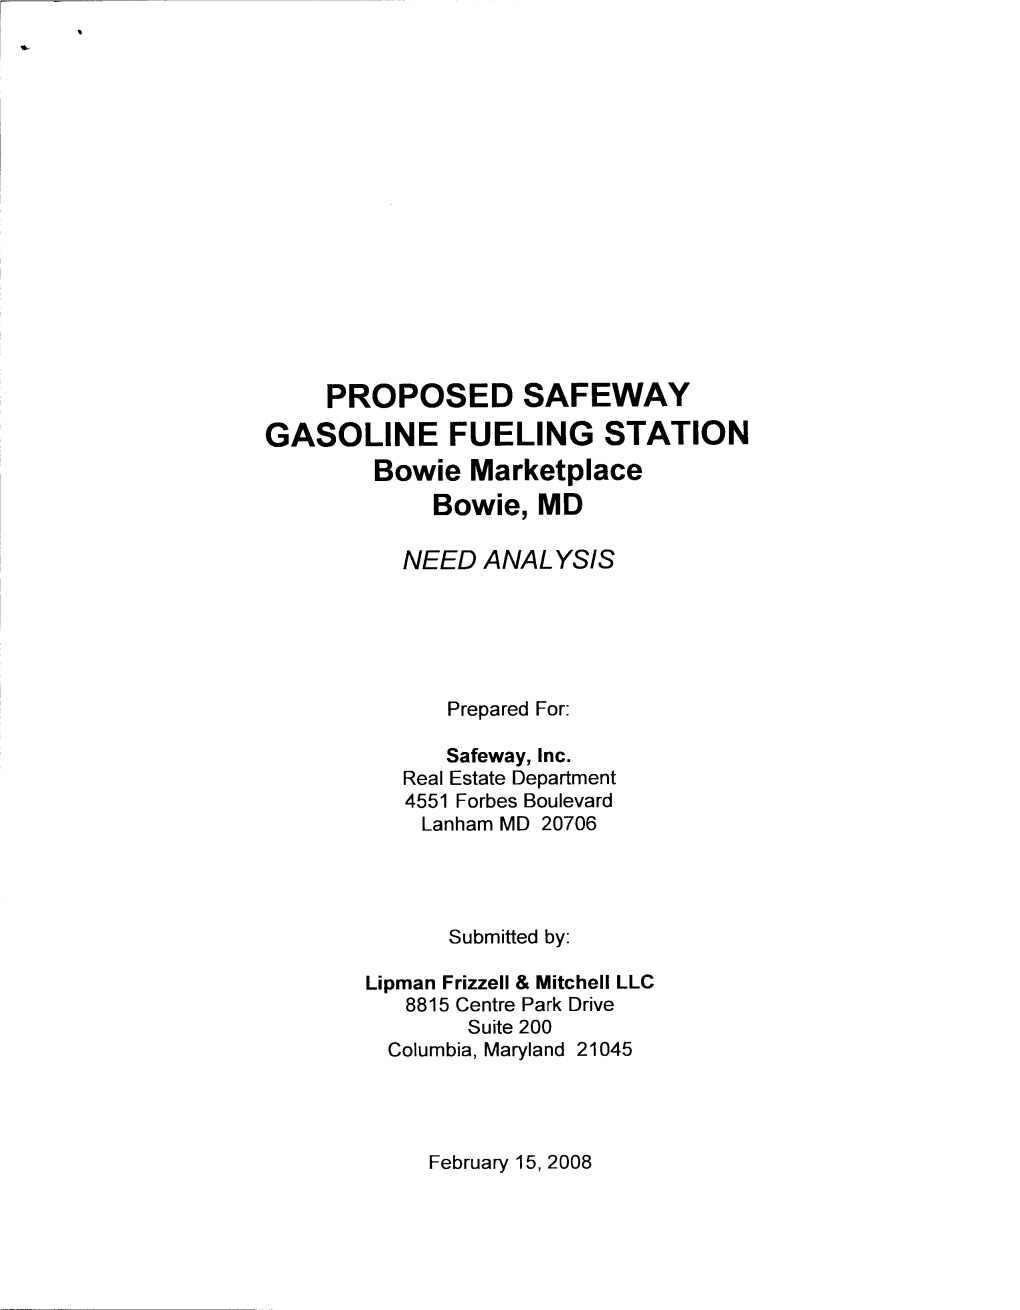 PROPOSED SAFEWAY GASOLINE FUELING STATION Bowie Marketplace Bowie MD